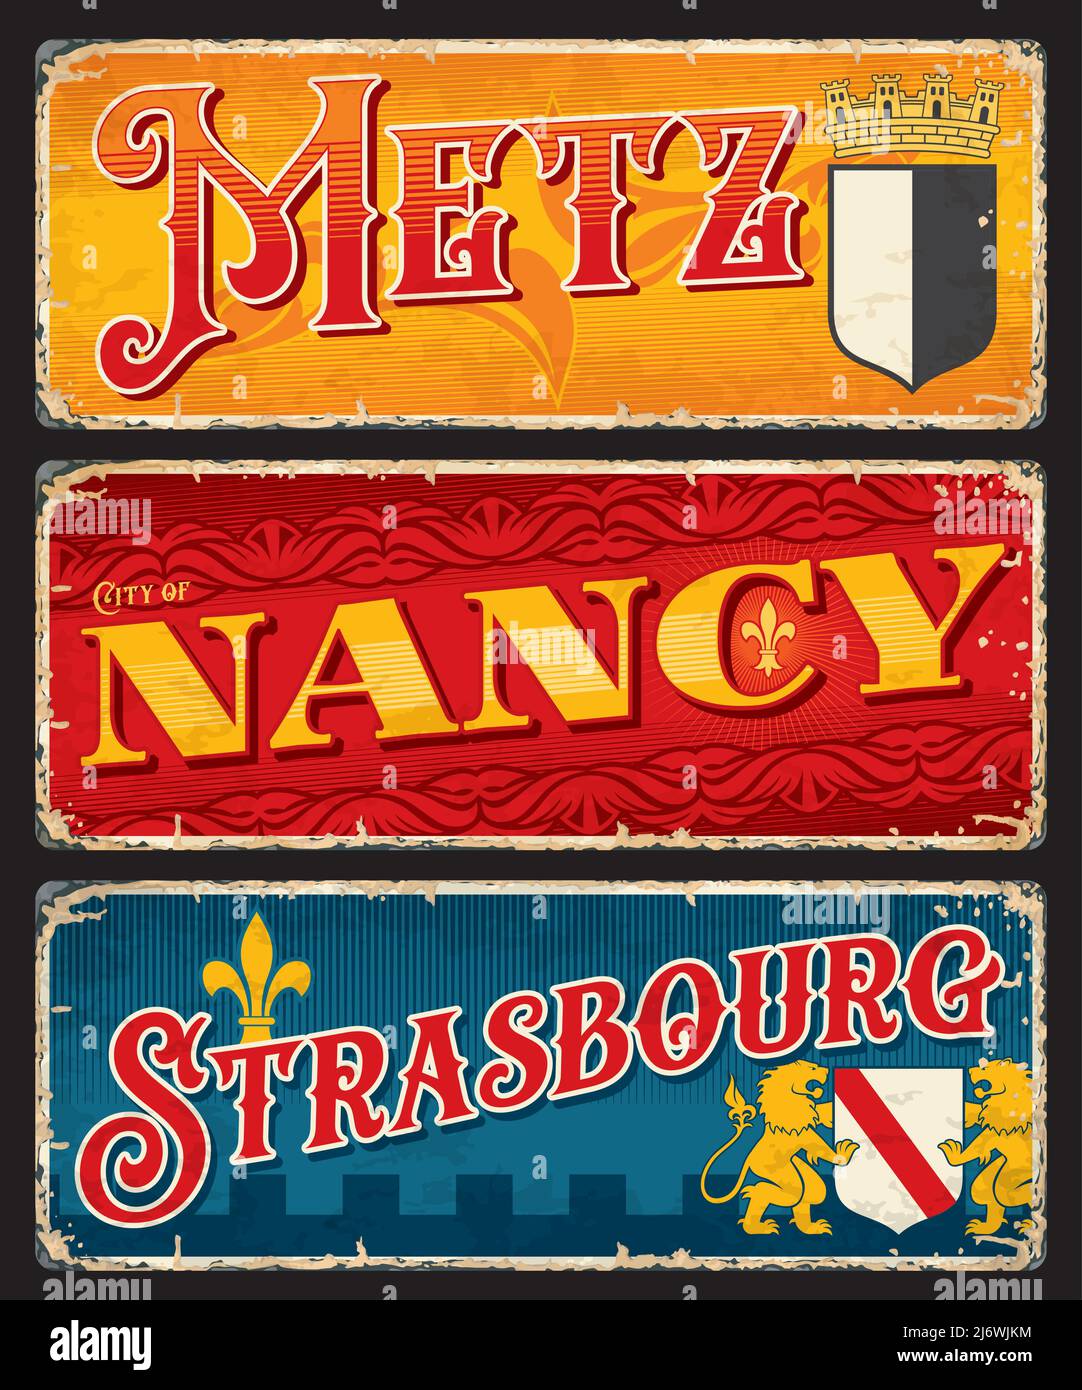 Metz, Nancy, Strasbourg french city travel stickers and plates. European vacation vector banner, France city journey voyage plate or grunge tin sign with antique typography and Coat of Arms symbols Stock Vector